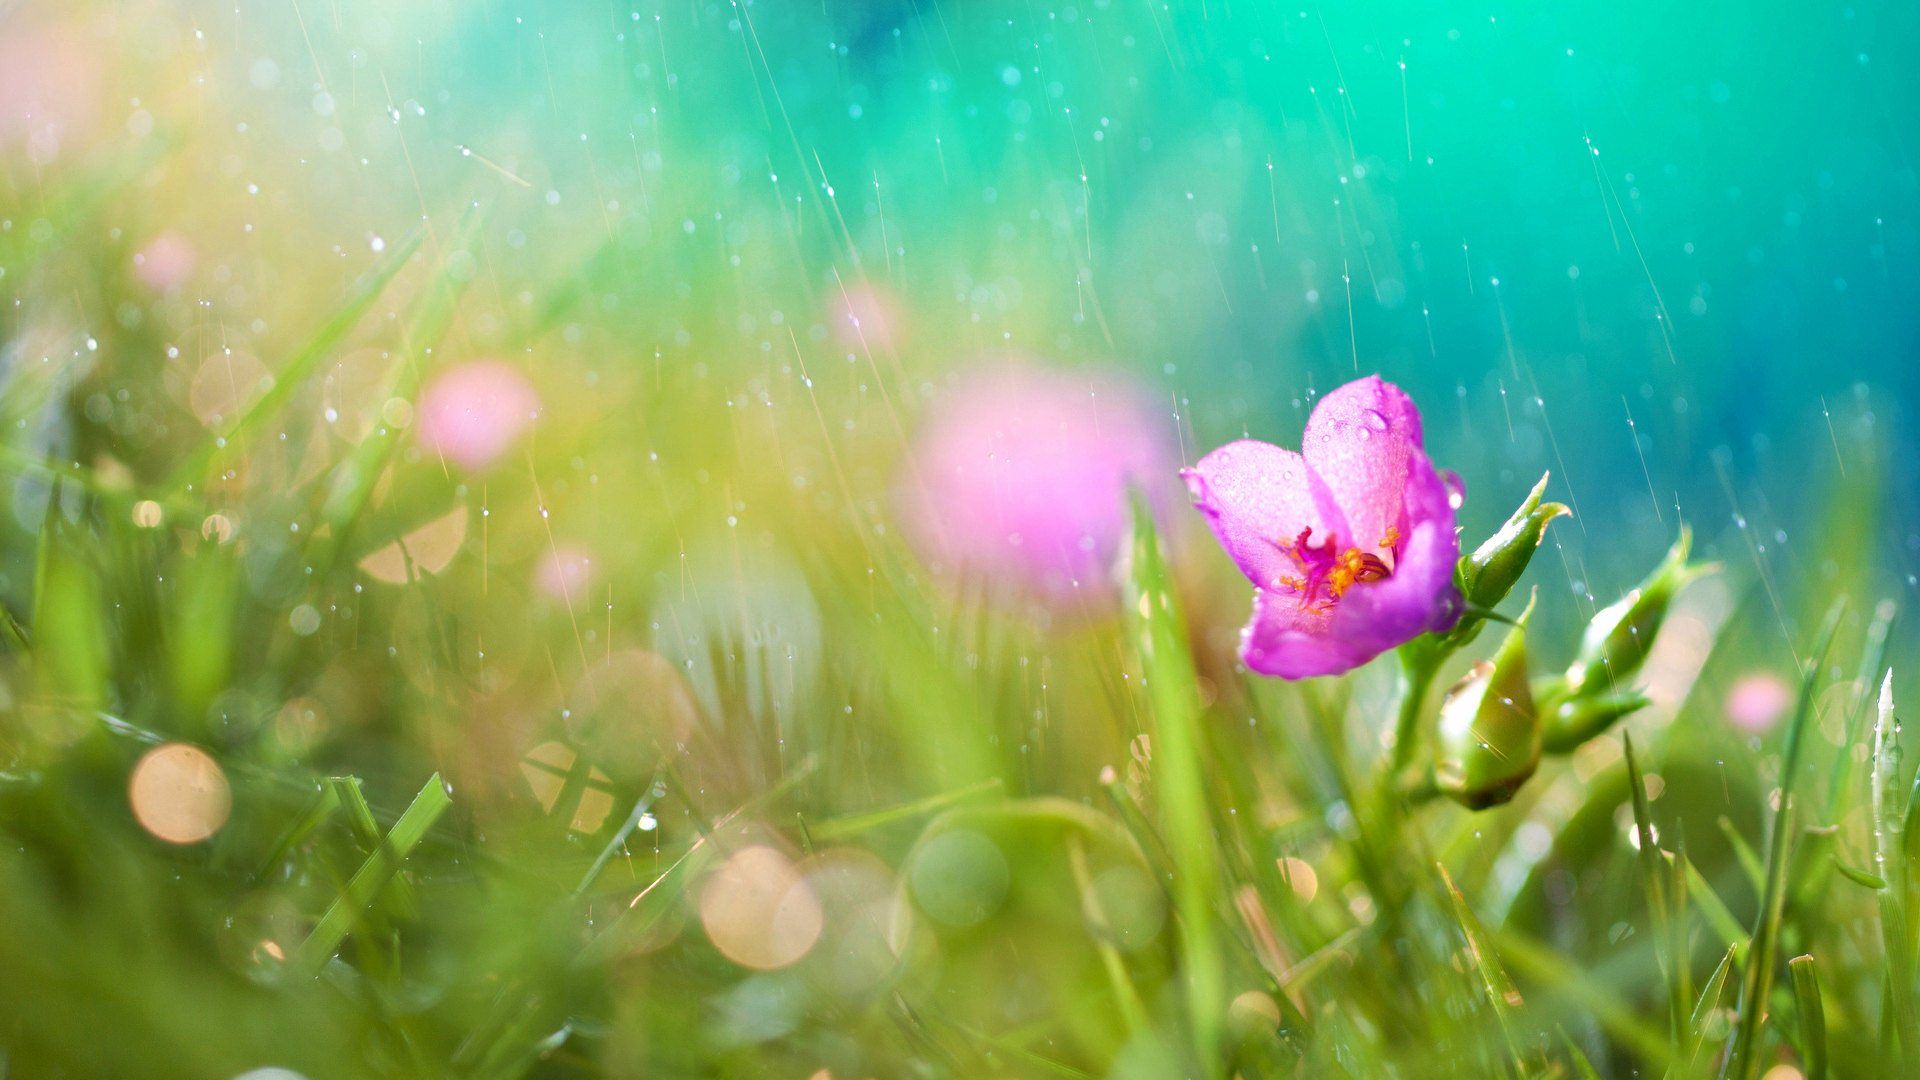 Free download Rainy Day HD Wallpaper Picture Image Background Photo [1920x1080] for your Desktop, Mobile & Tablet. Explore Rainy Spring Day Wallpaper. Rainy Day Wallpaper Image, Stormy Day Desktop